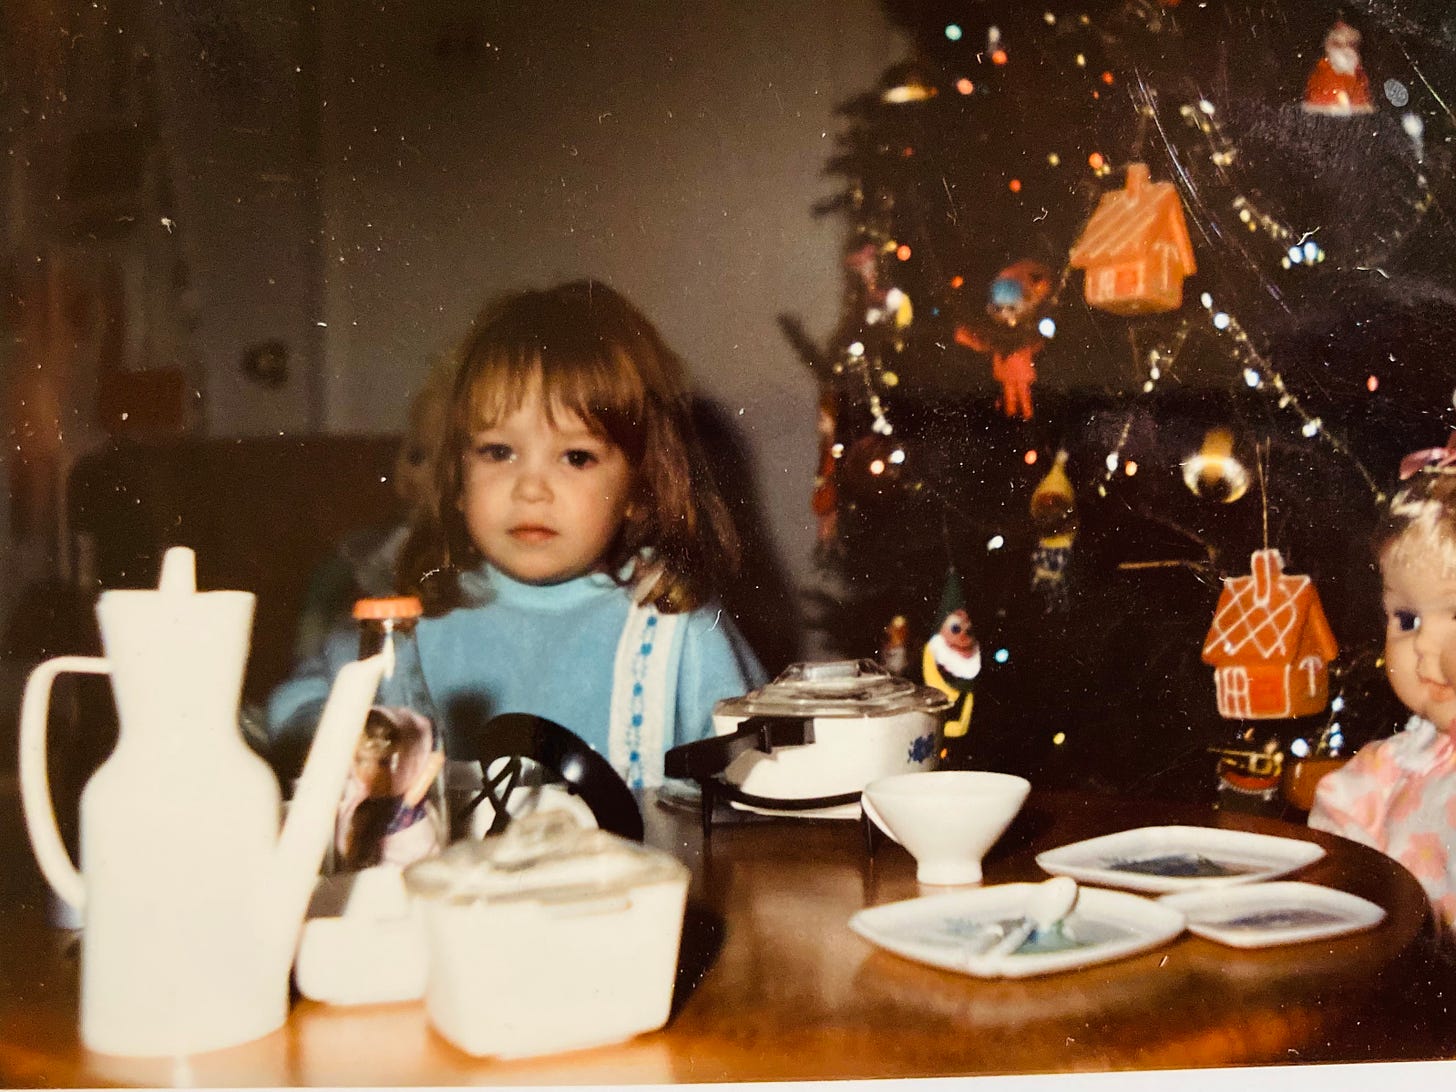 Little girl and doll having tea party by the Christmas tree